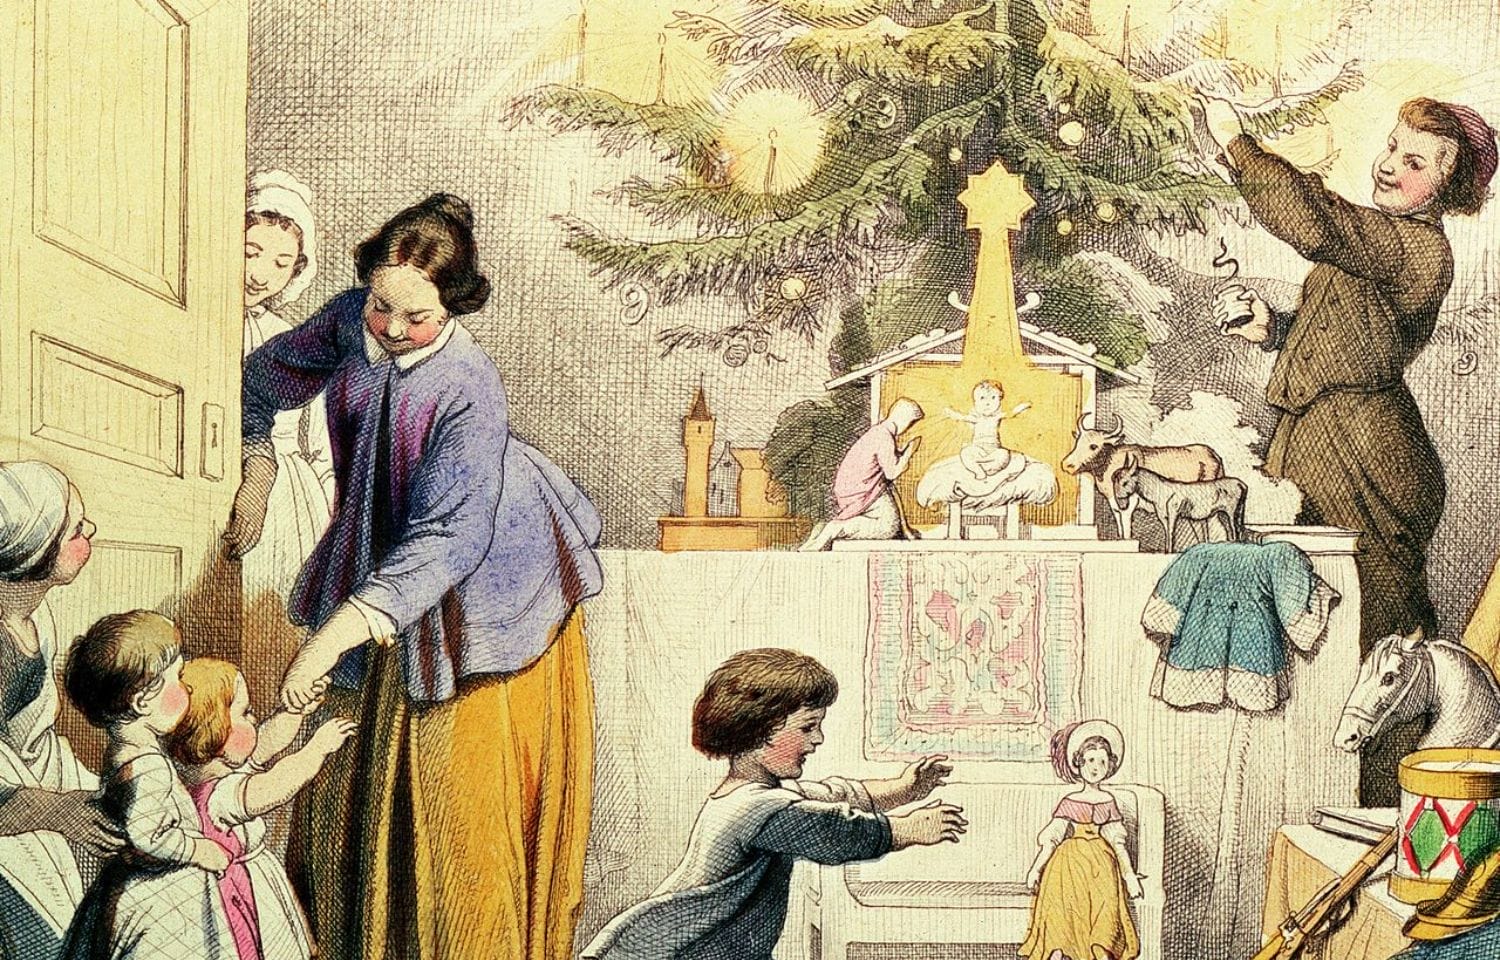 who invented christmas?